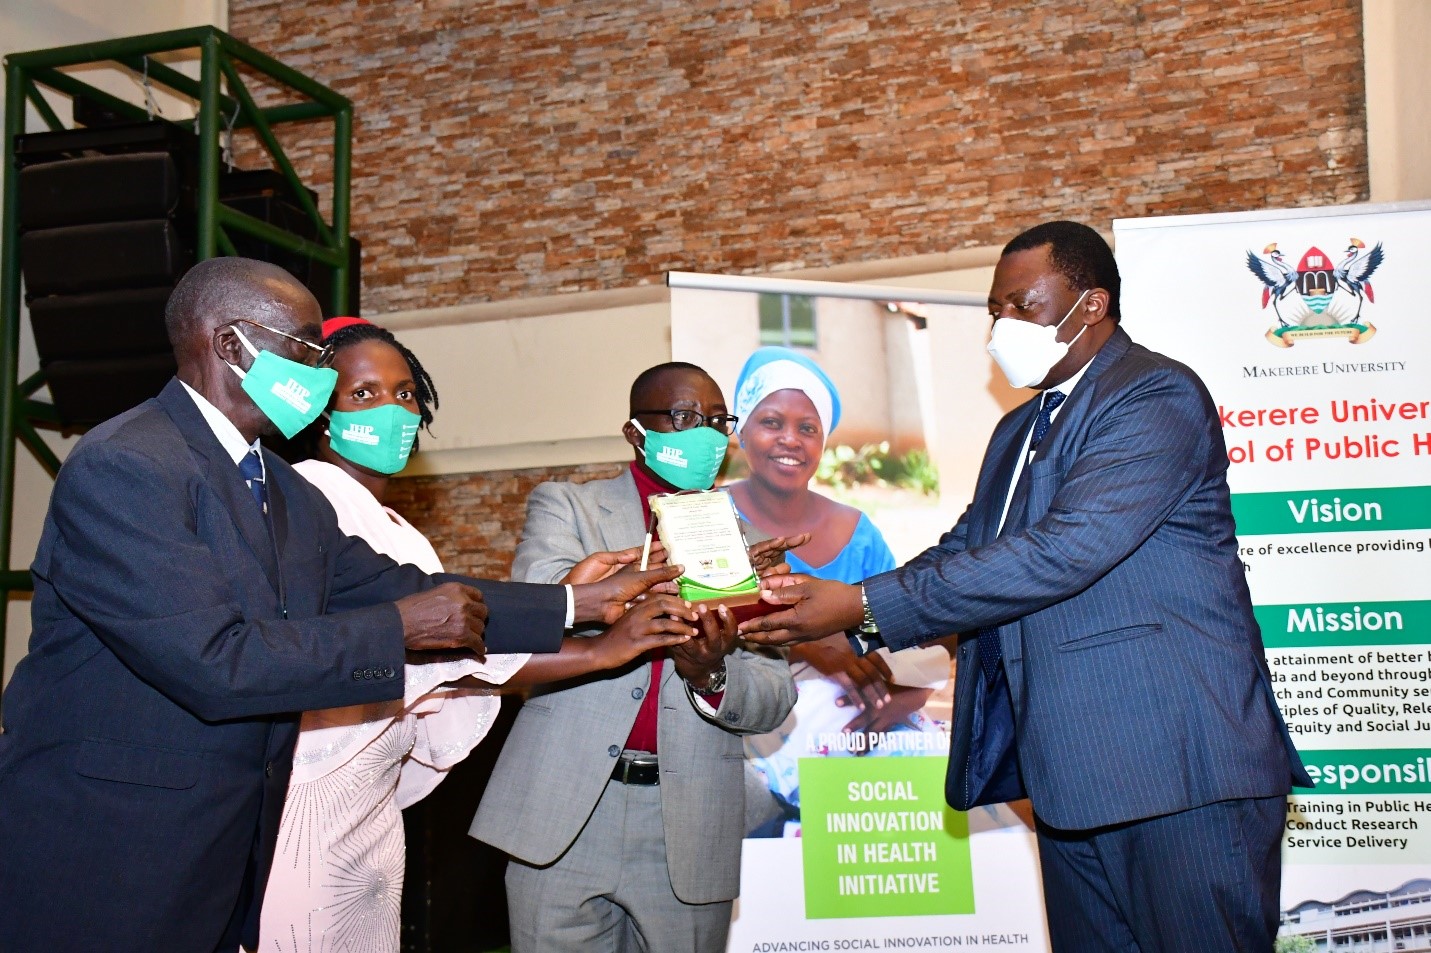 Dr. Olaro Charles, Director Clinical Services at Ministry of Health hands over a plaque to Dr. Manasseh Tumuhimbise and colleagues from Ishaka Health Plan, the winners of the 2020 Social Innovations in Health Awards organized by the School of Public Health. 